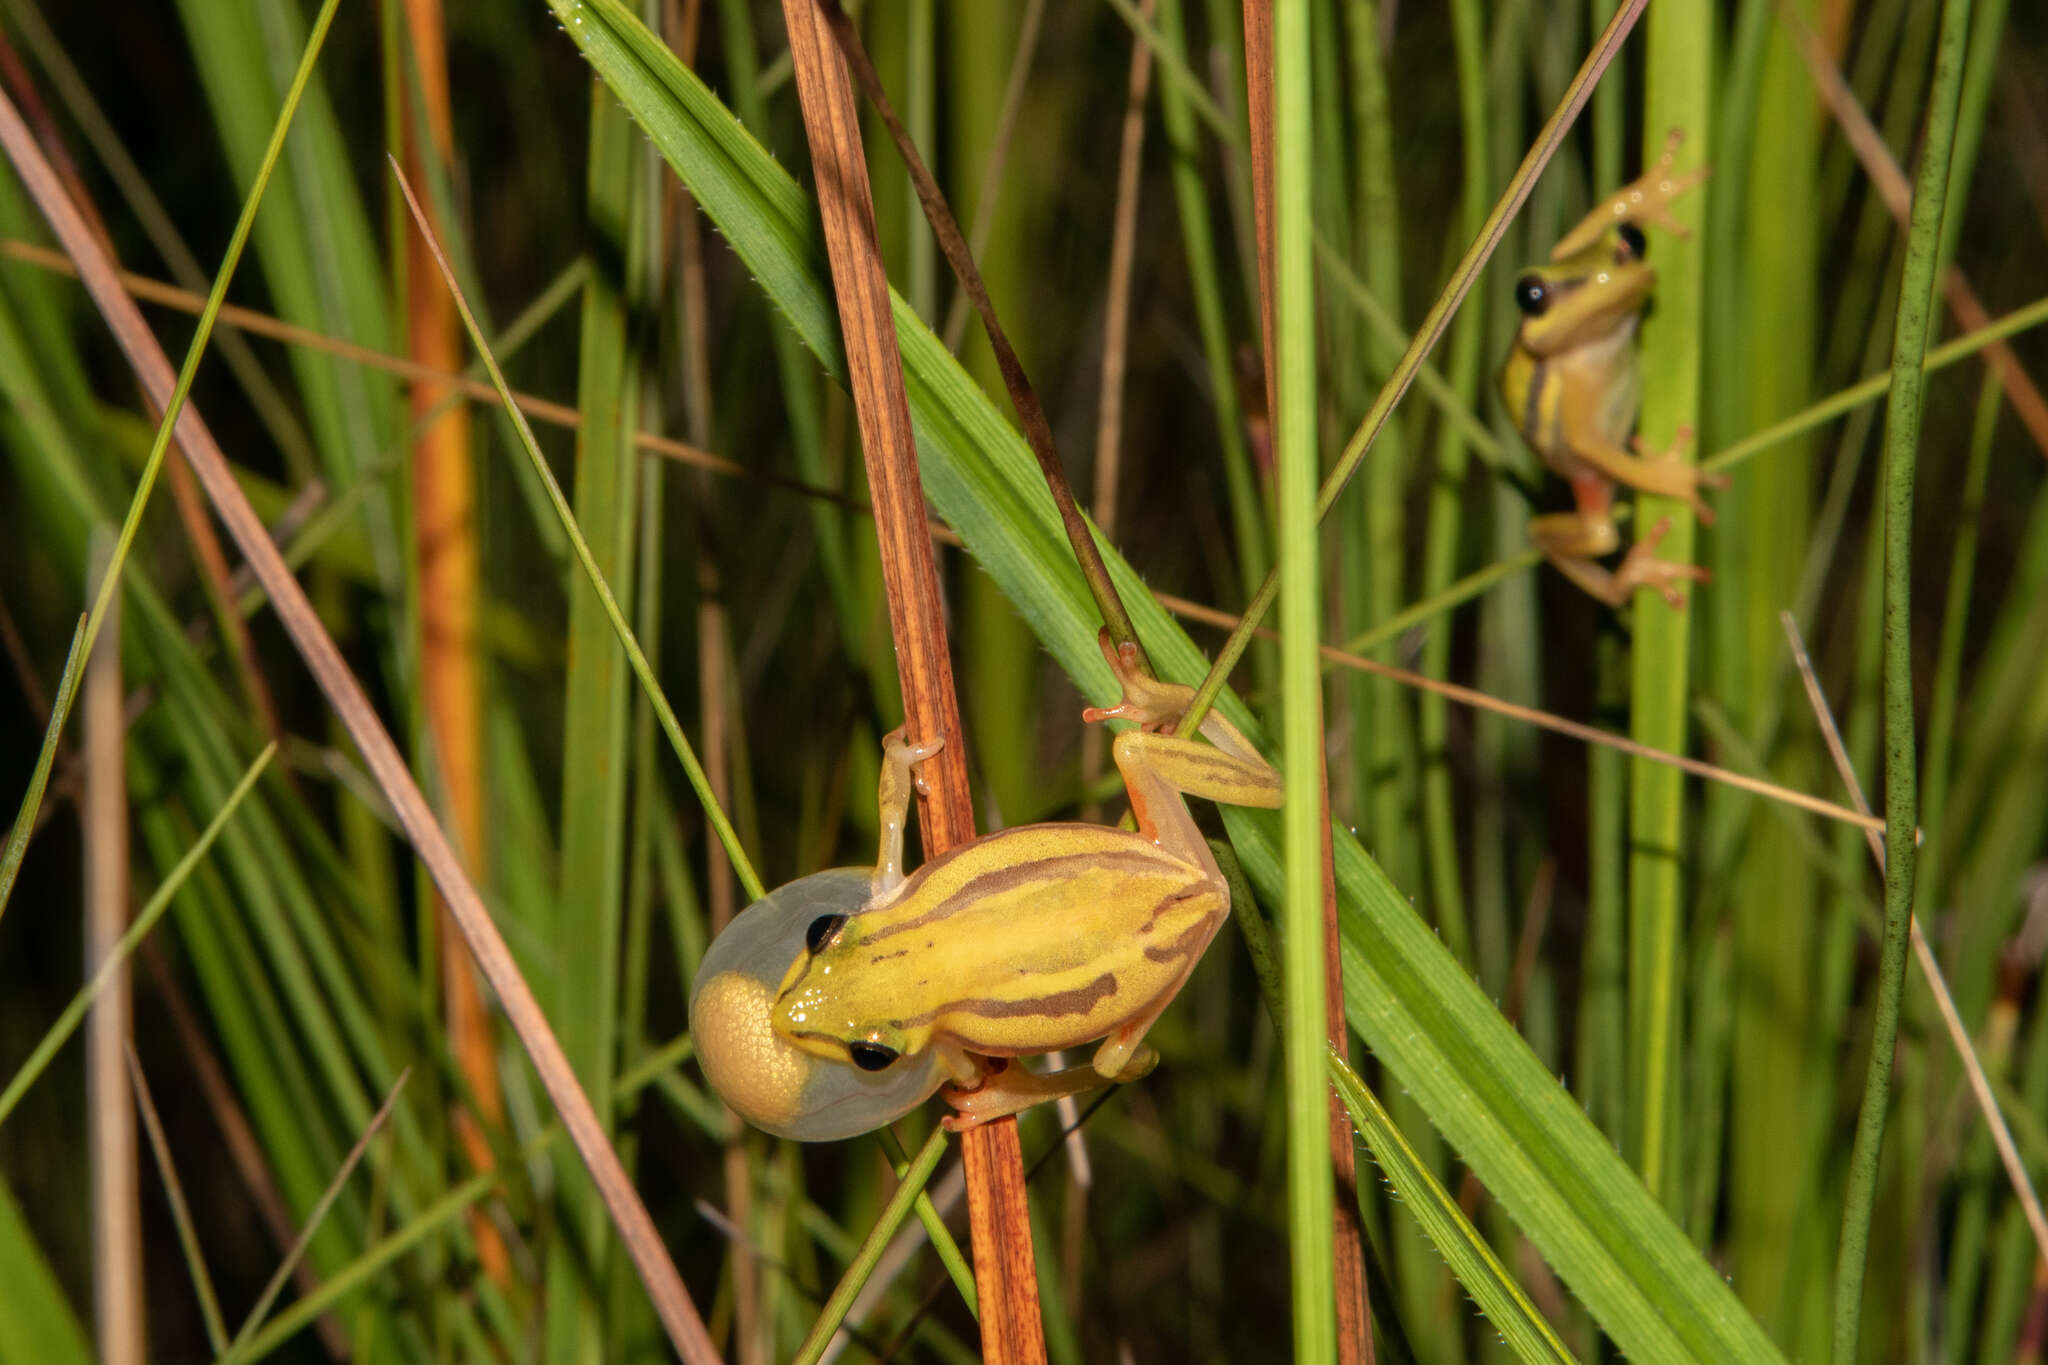 Image of Five-striped Reed Frog